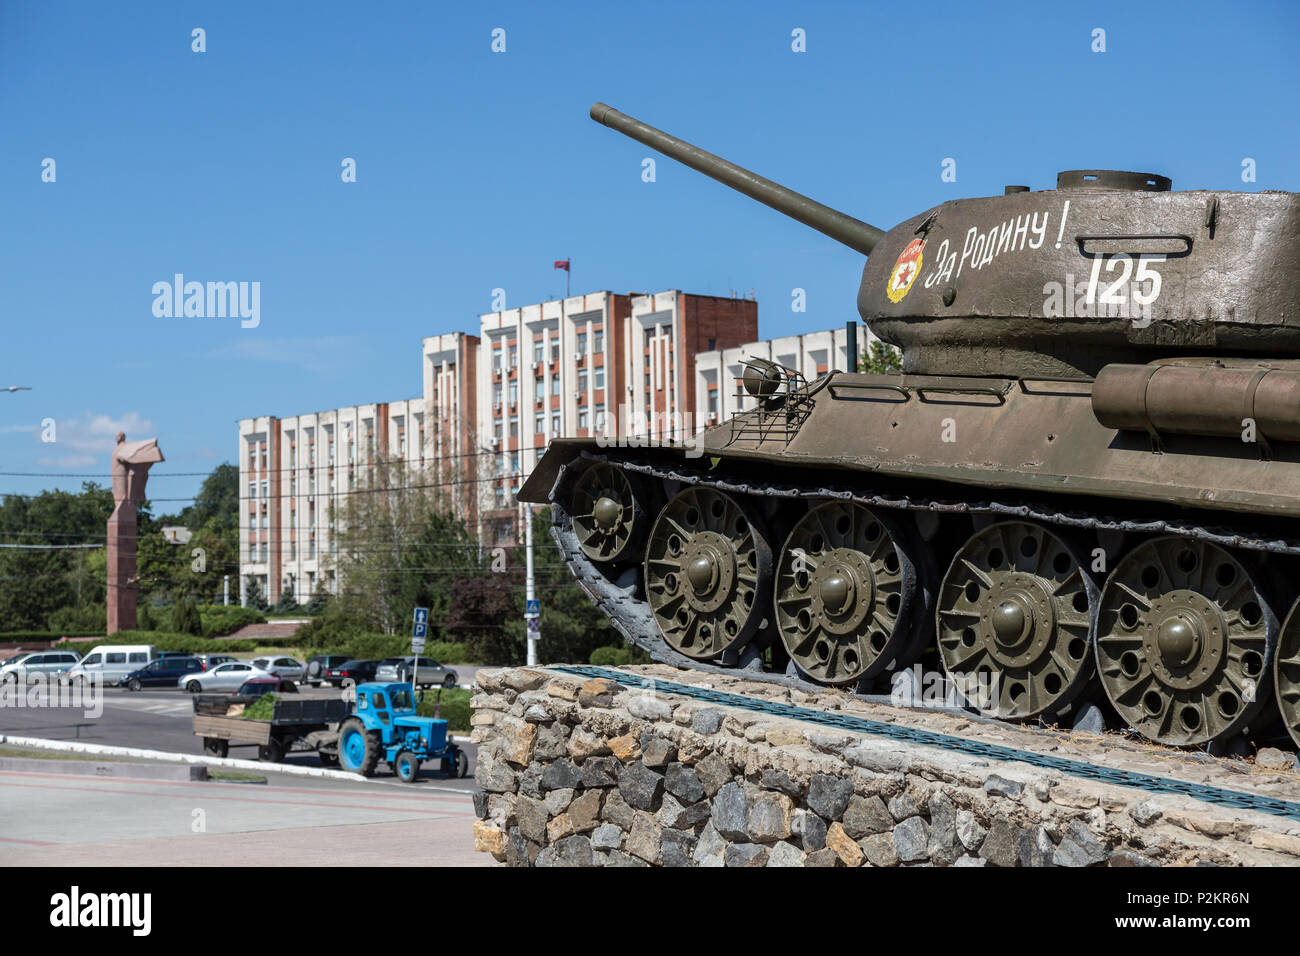 25.08.2016, Tiraspol, Transnistria, Moldova - The famous tank monument in the city center, a Russian T 34 from the Second World War. One of the many r Stock Photo